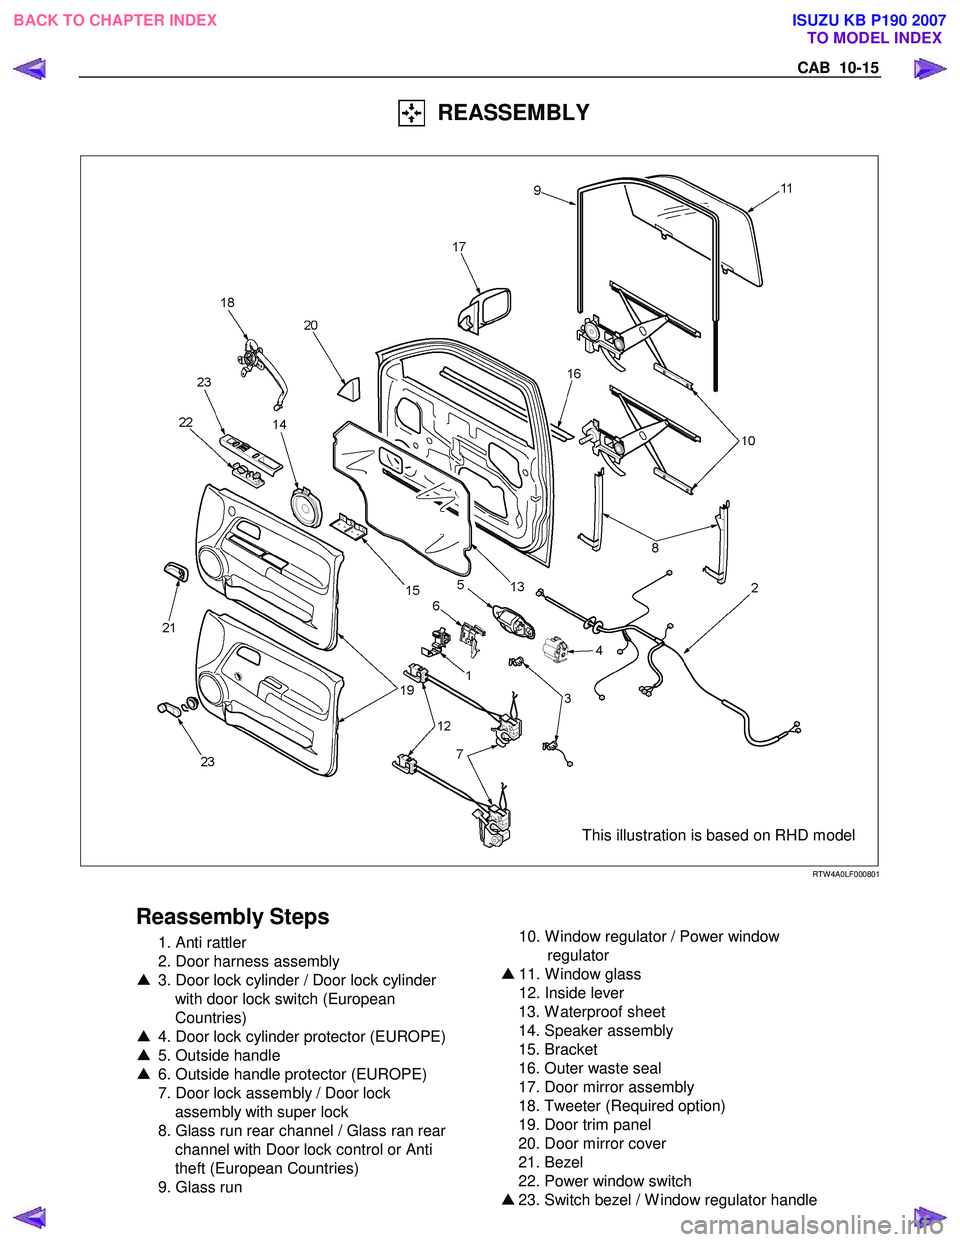 ISUZU KB P190 2007  Workshop Repair Manual CAB  10-15 
    REASSEMBLY 
  
 
 
 
This illustration is based on RHD model 
 
RTW 4A0LF000801 
 
Reassembly Steps 
  1. Anti rattler  
  2. Door harness assembly 
▲   3. Door lock cylinder / Door 